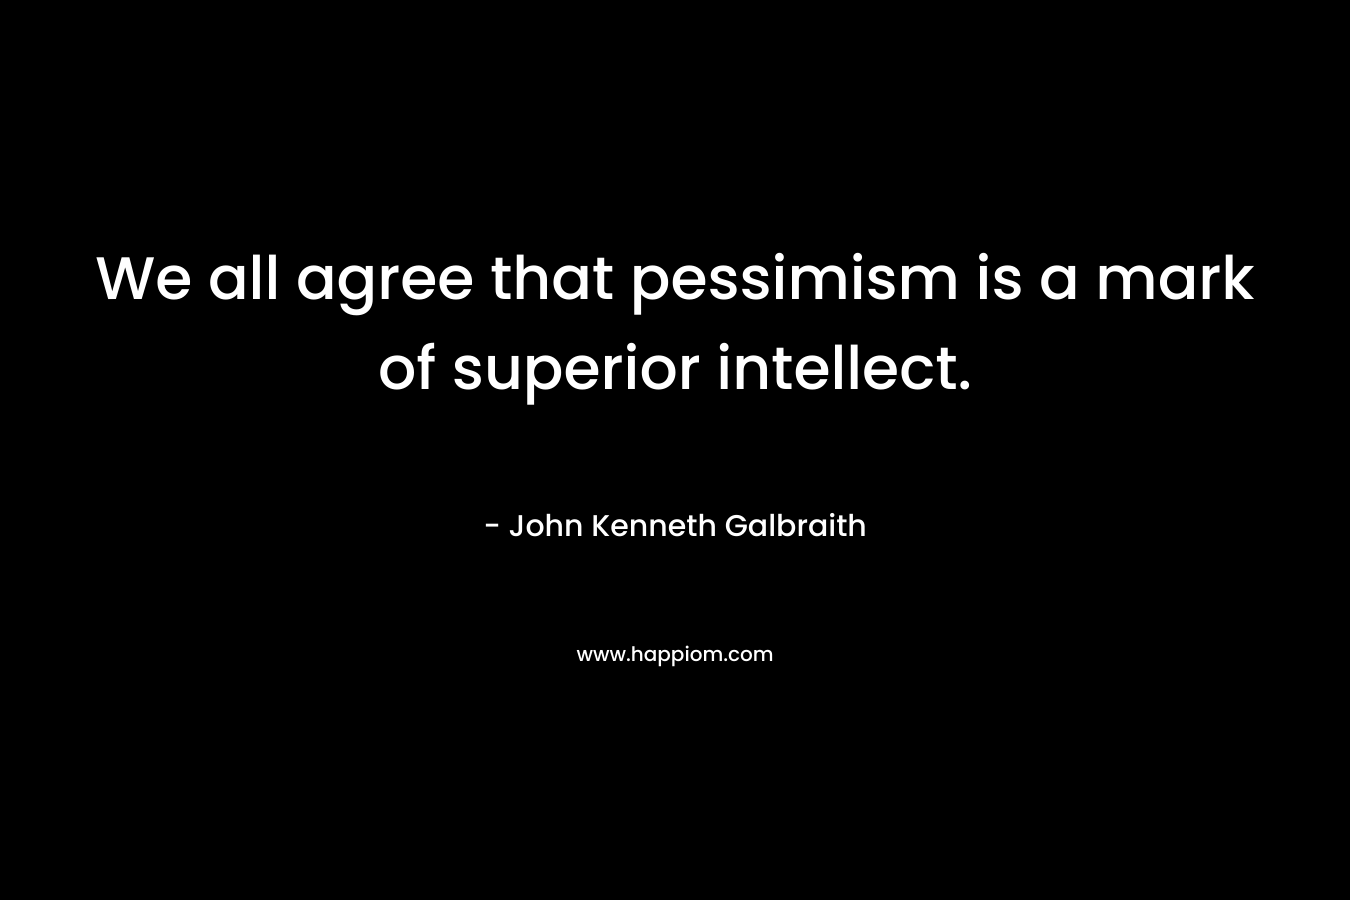 We all agree that pessimism is a mark of superior intellect. – John Kenneth Galbraith